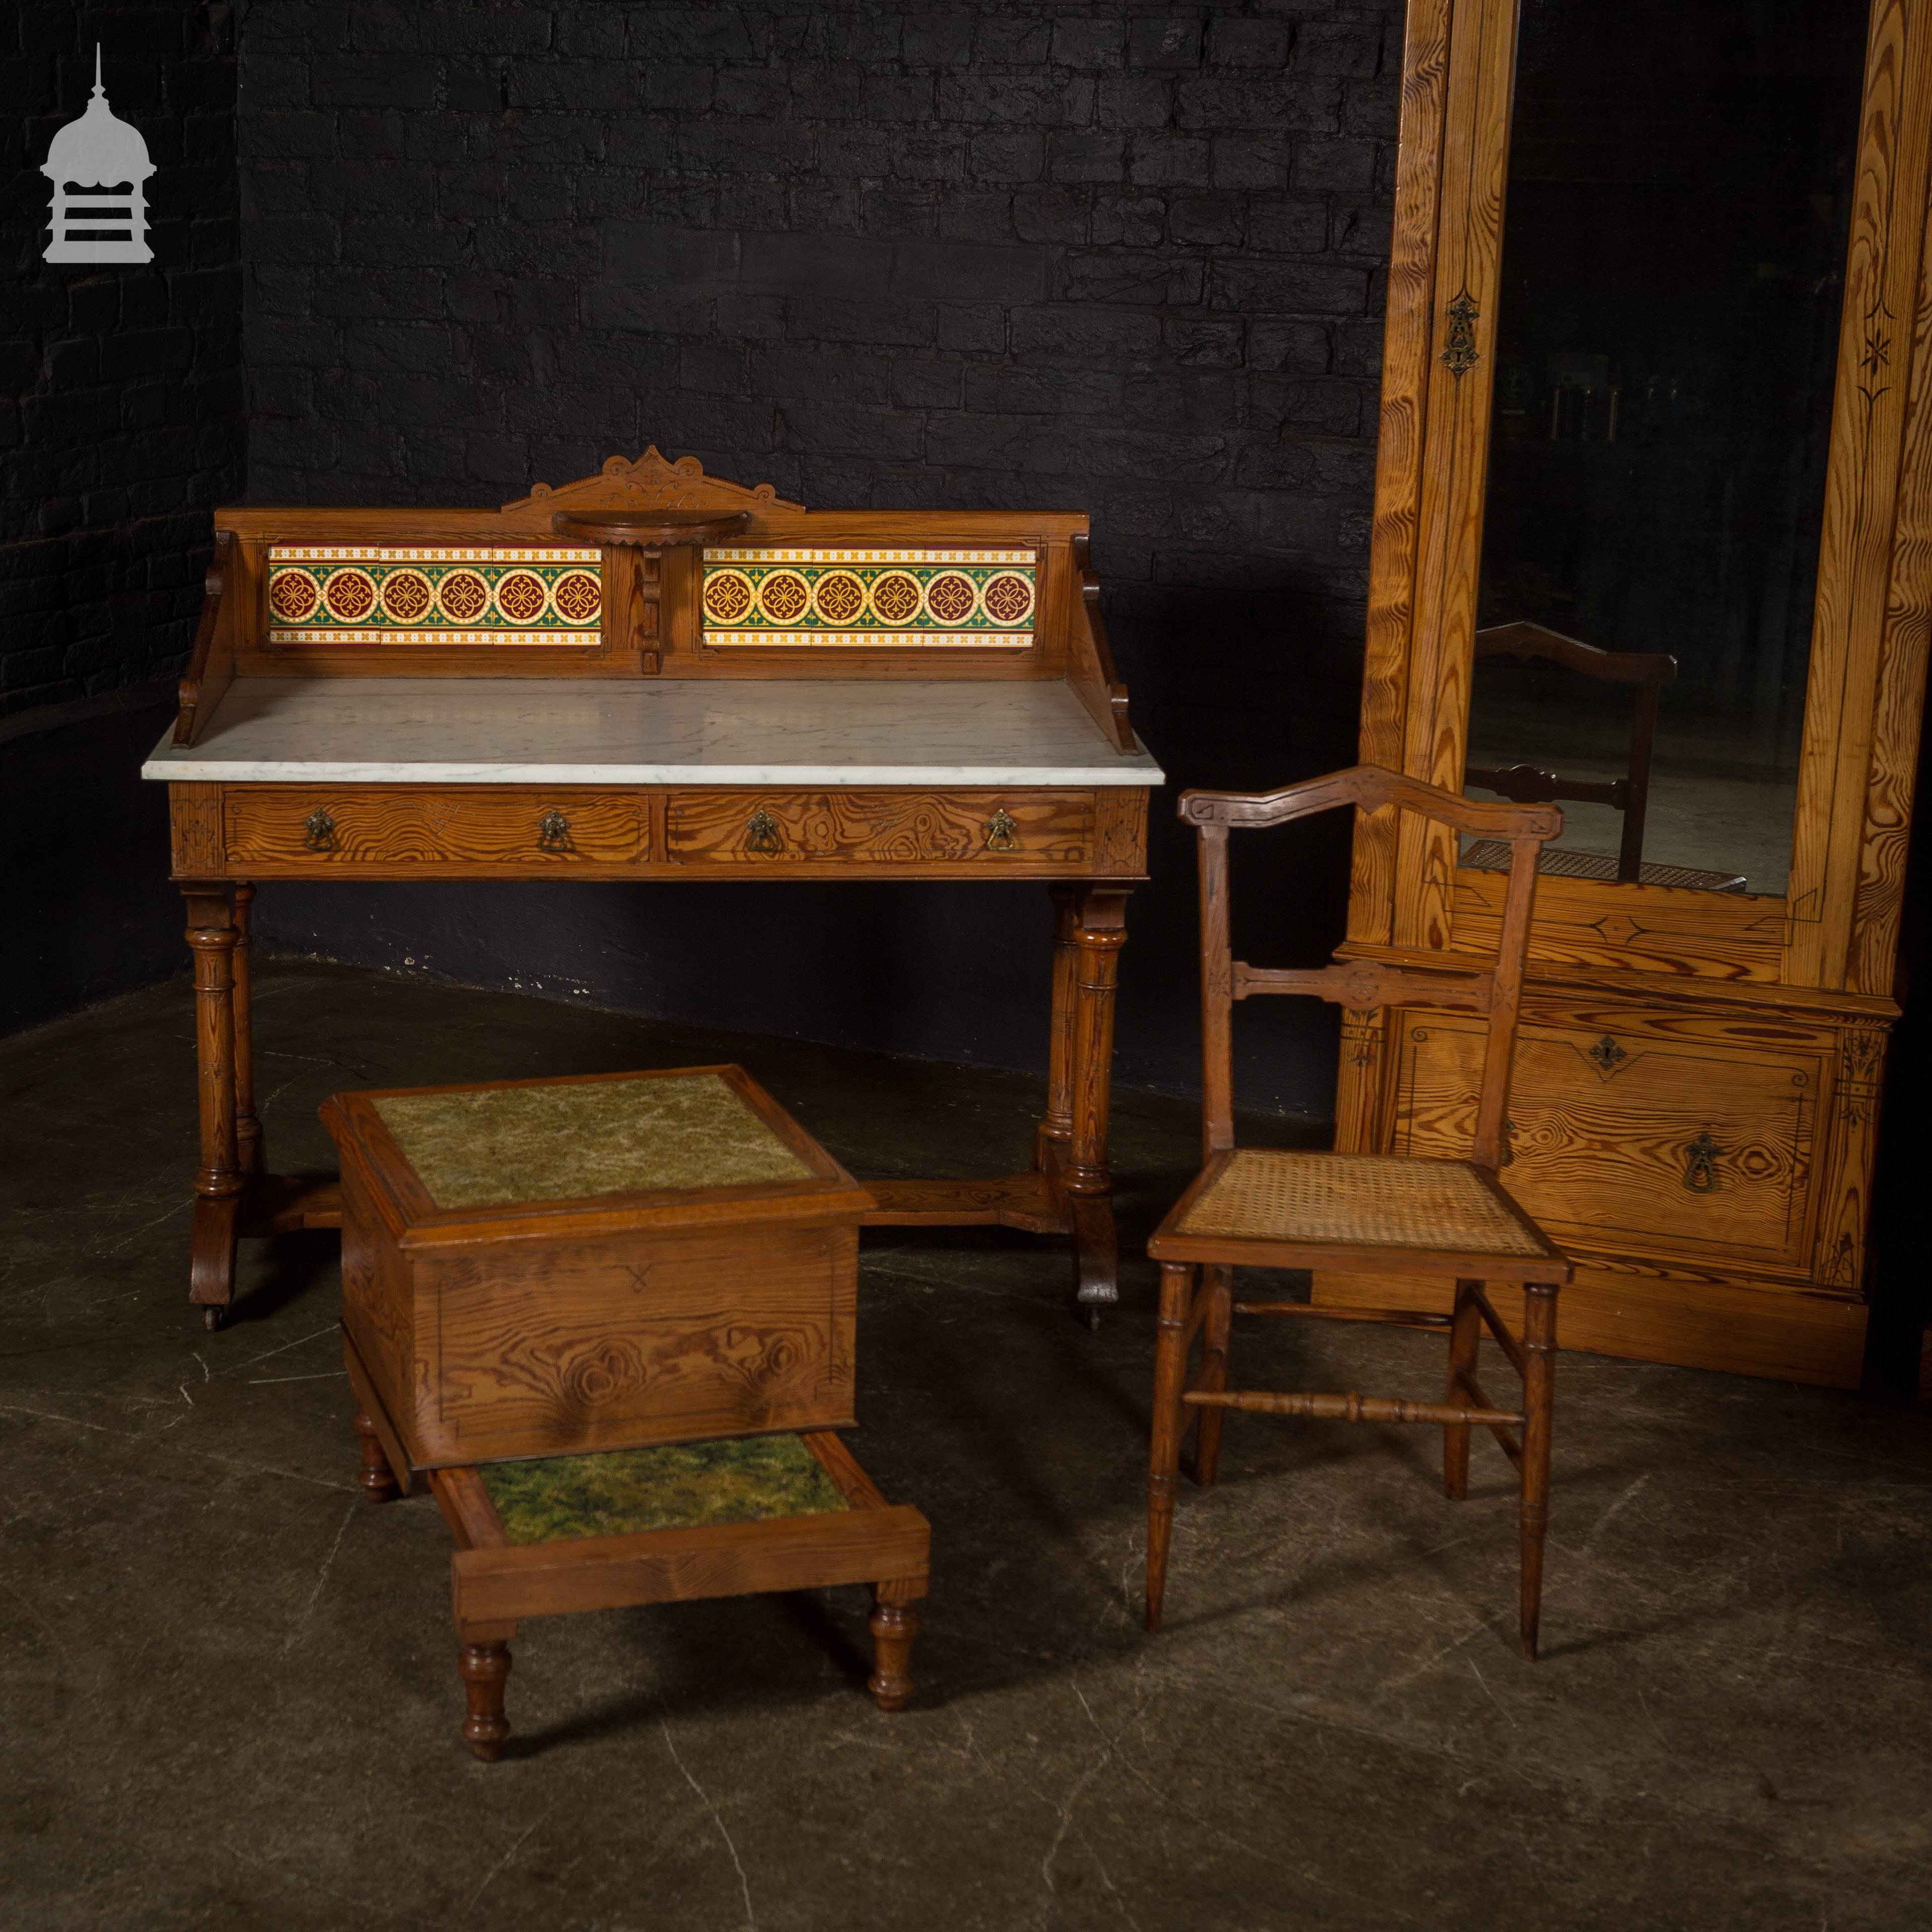 Stunning 19th century Aesthetic movement pitch pine seven-piece bedroom suite.
Fantastic bedroom suite made by TW Stidolph, Dartford, including towel rail, commode, pair of chairs, wash stand, dressing table, chest of drawers and single wardrobe